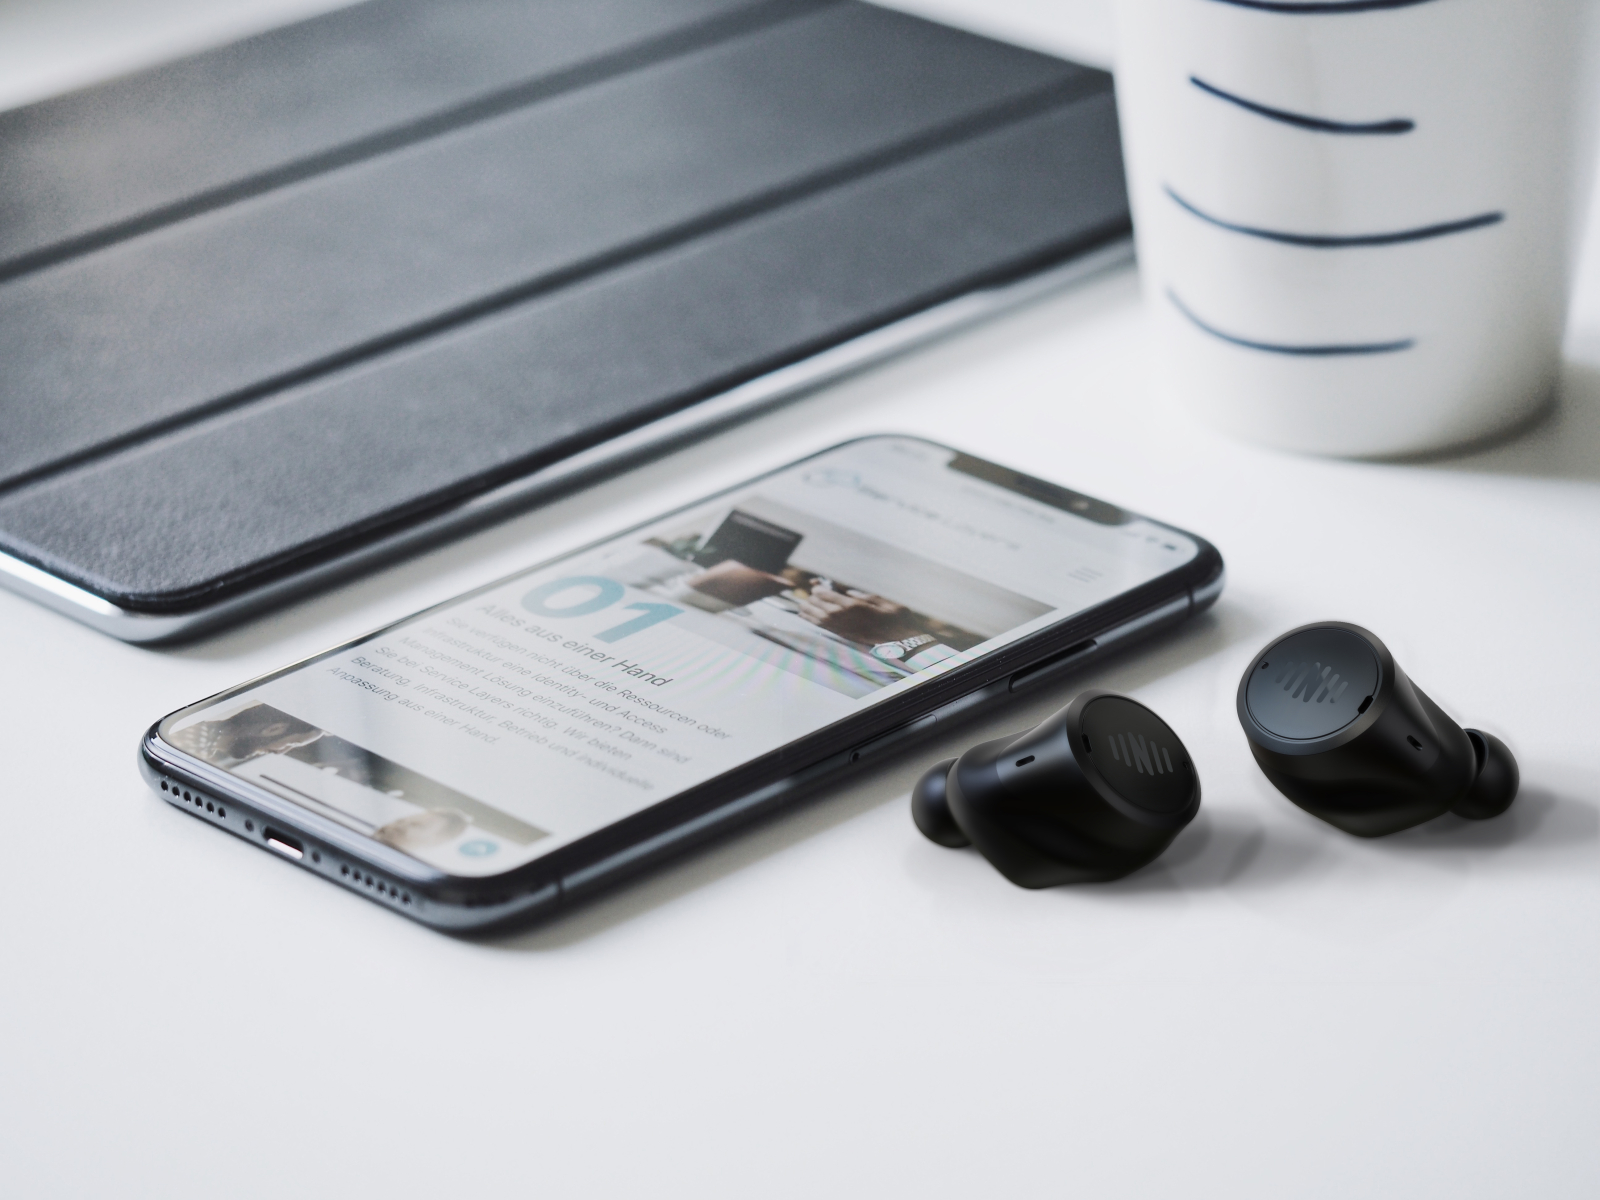 Nuheara’s true wireless earbuds have some really smart features